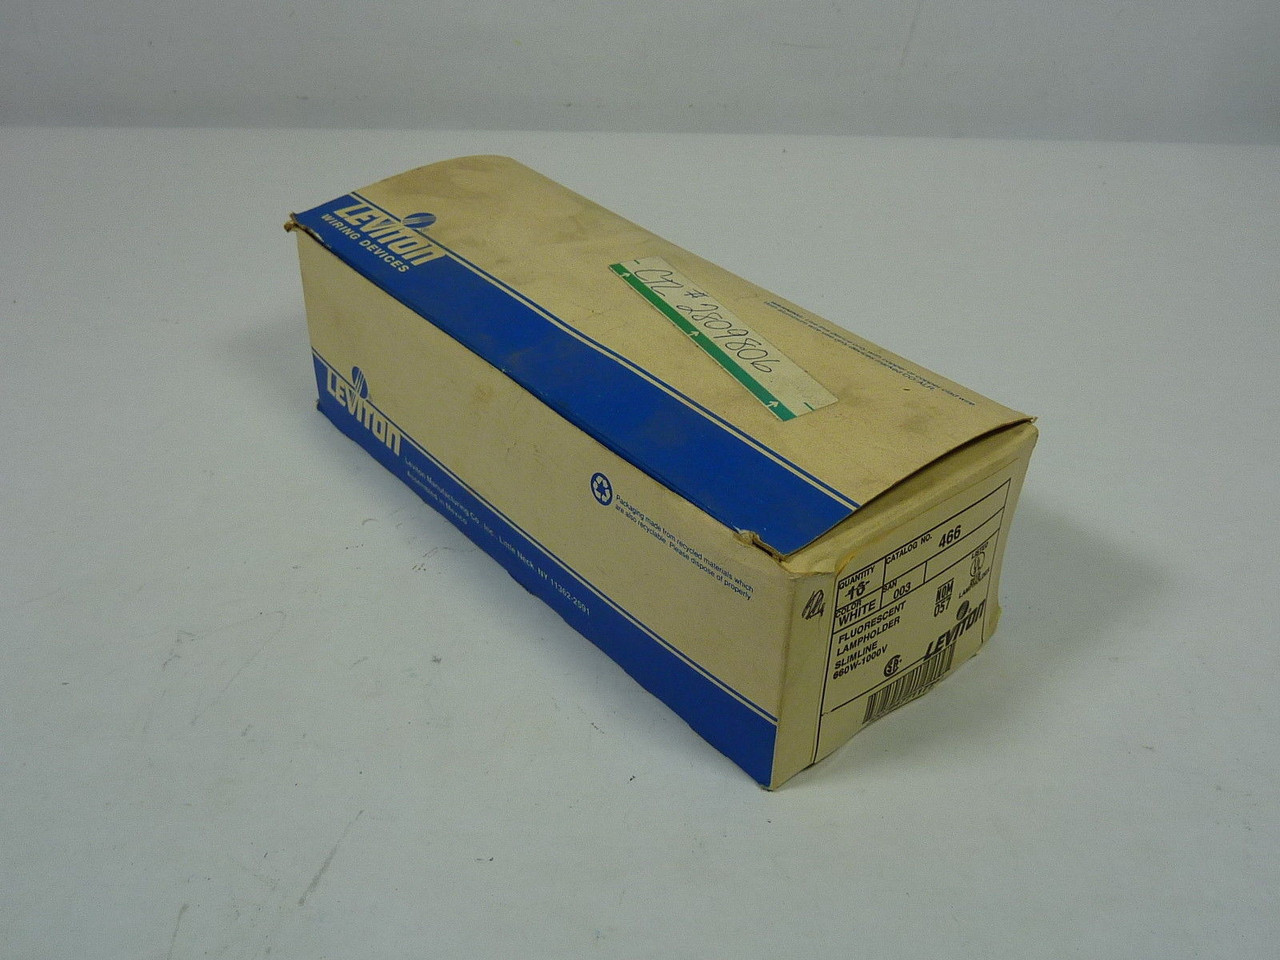 Leviton 466 Fluorescent Lamp Holder 660W 1000V Sold Individually ! NOP !